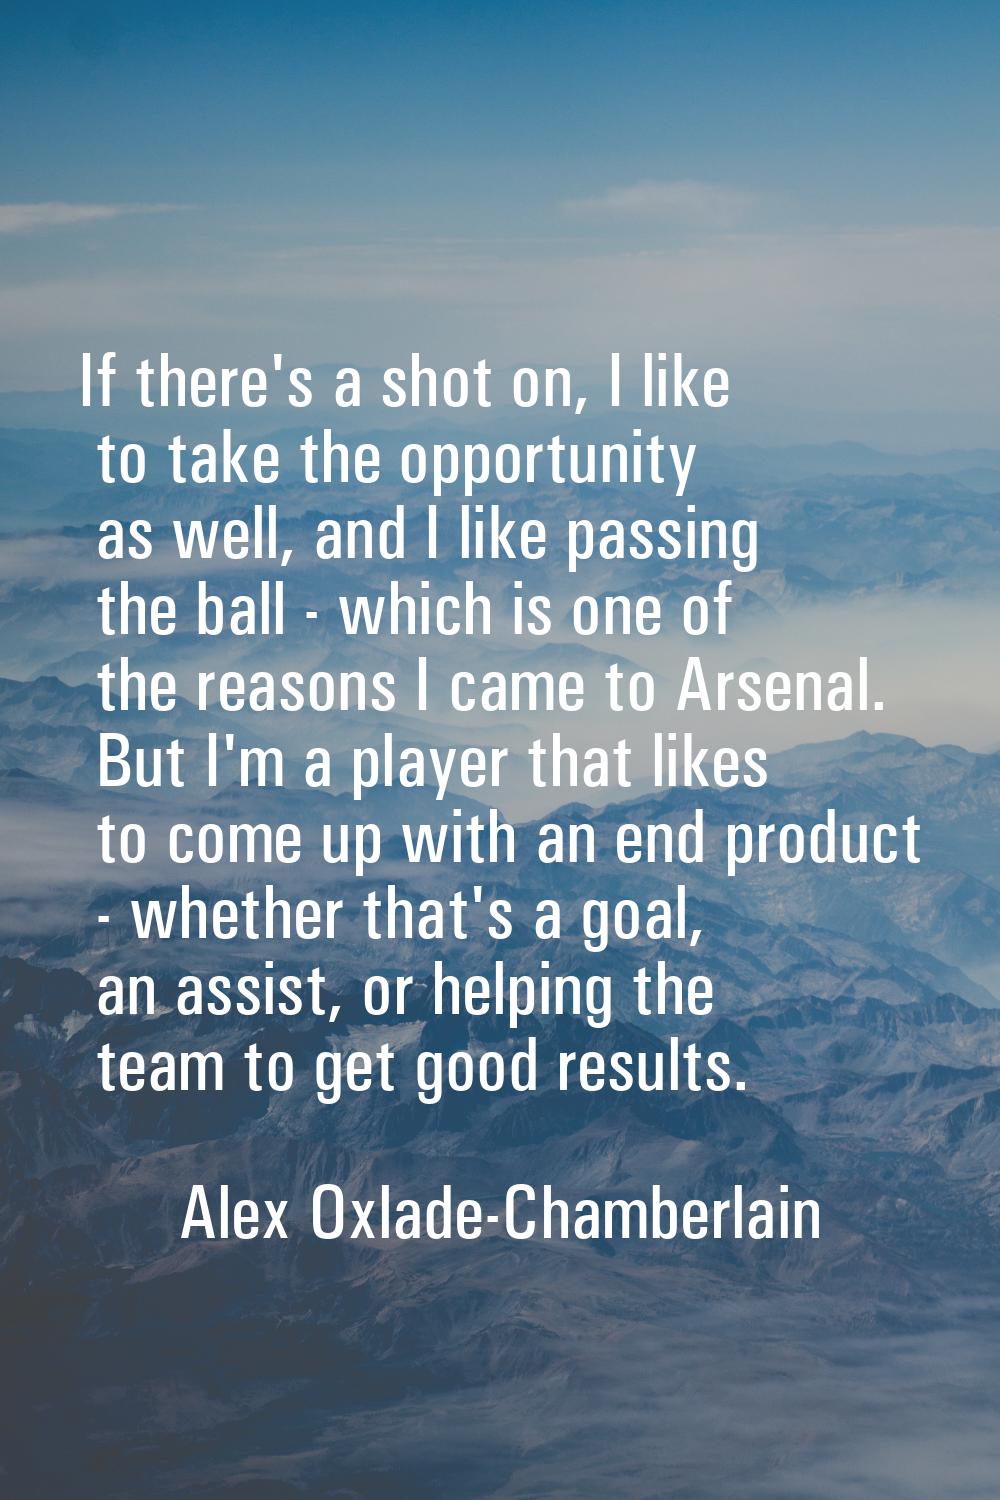 If there's a shot on, I like to take the opportunity as well, and I like passing the ball - which i